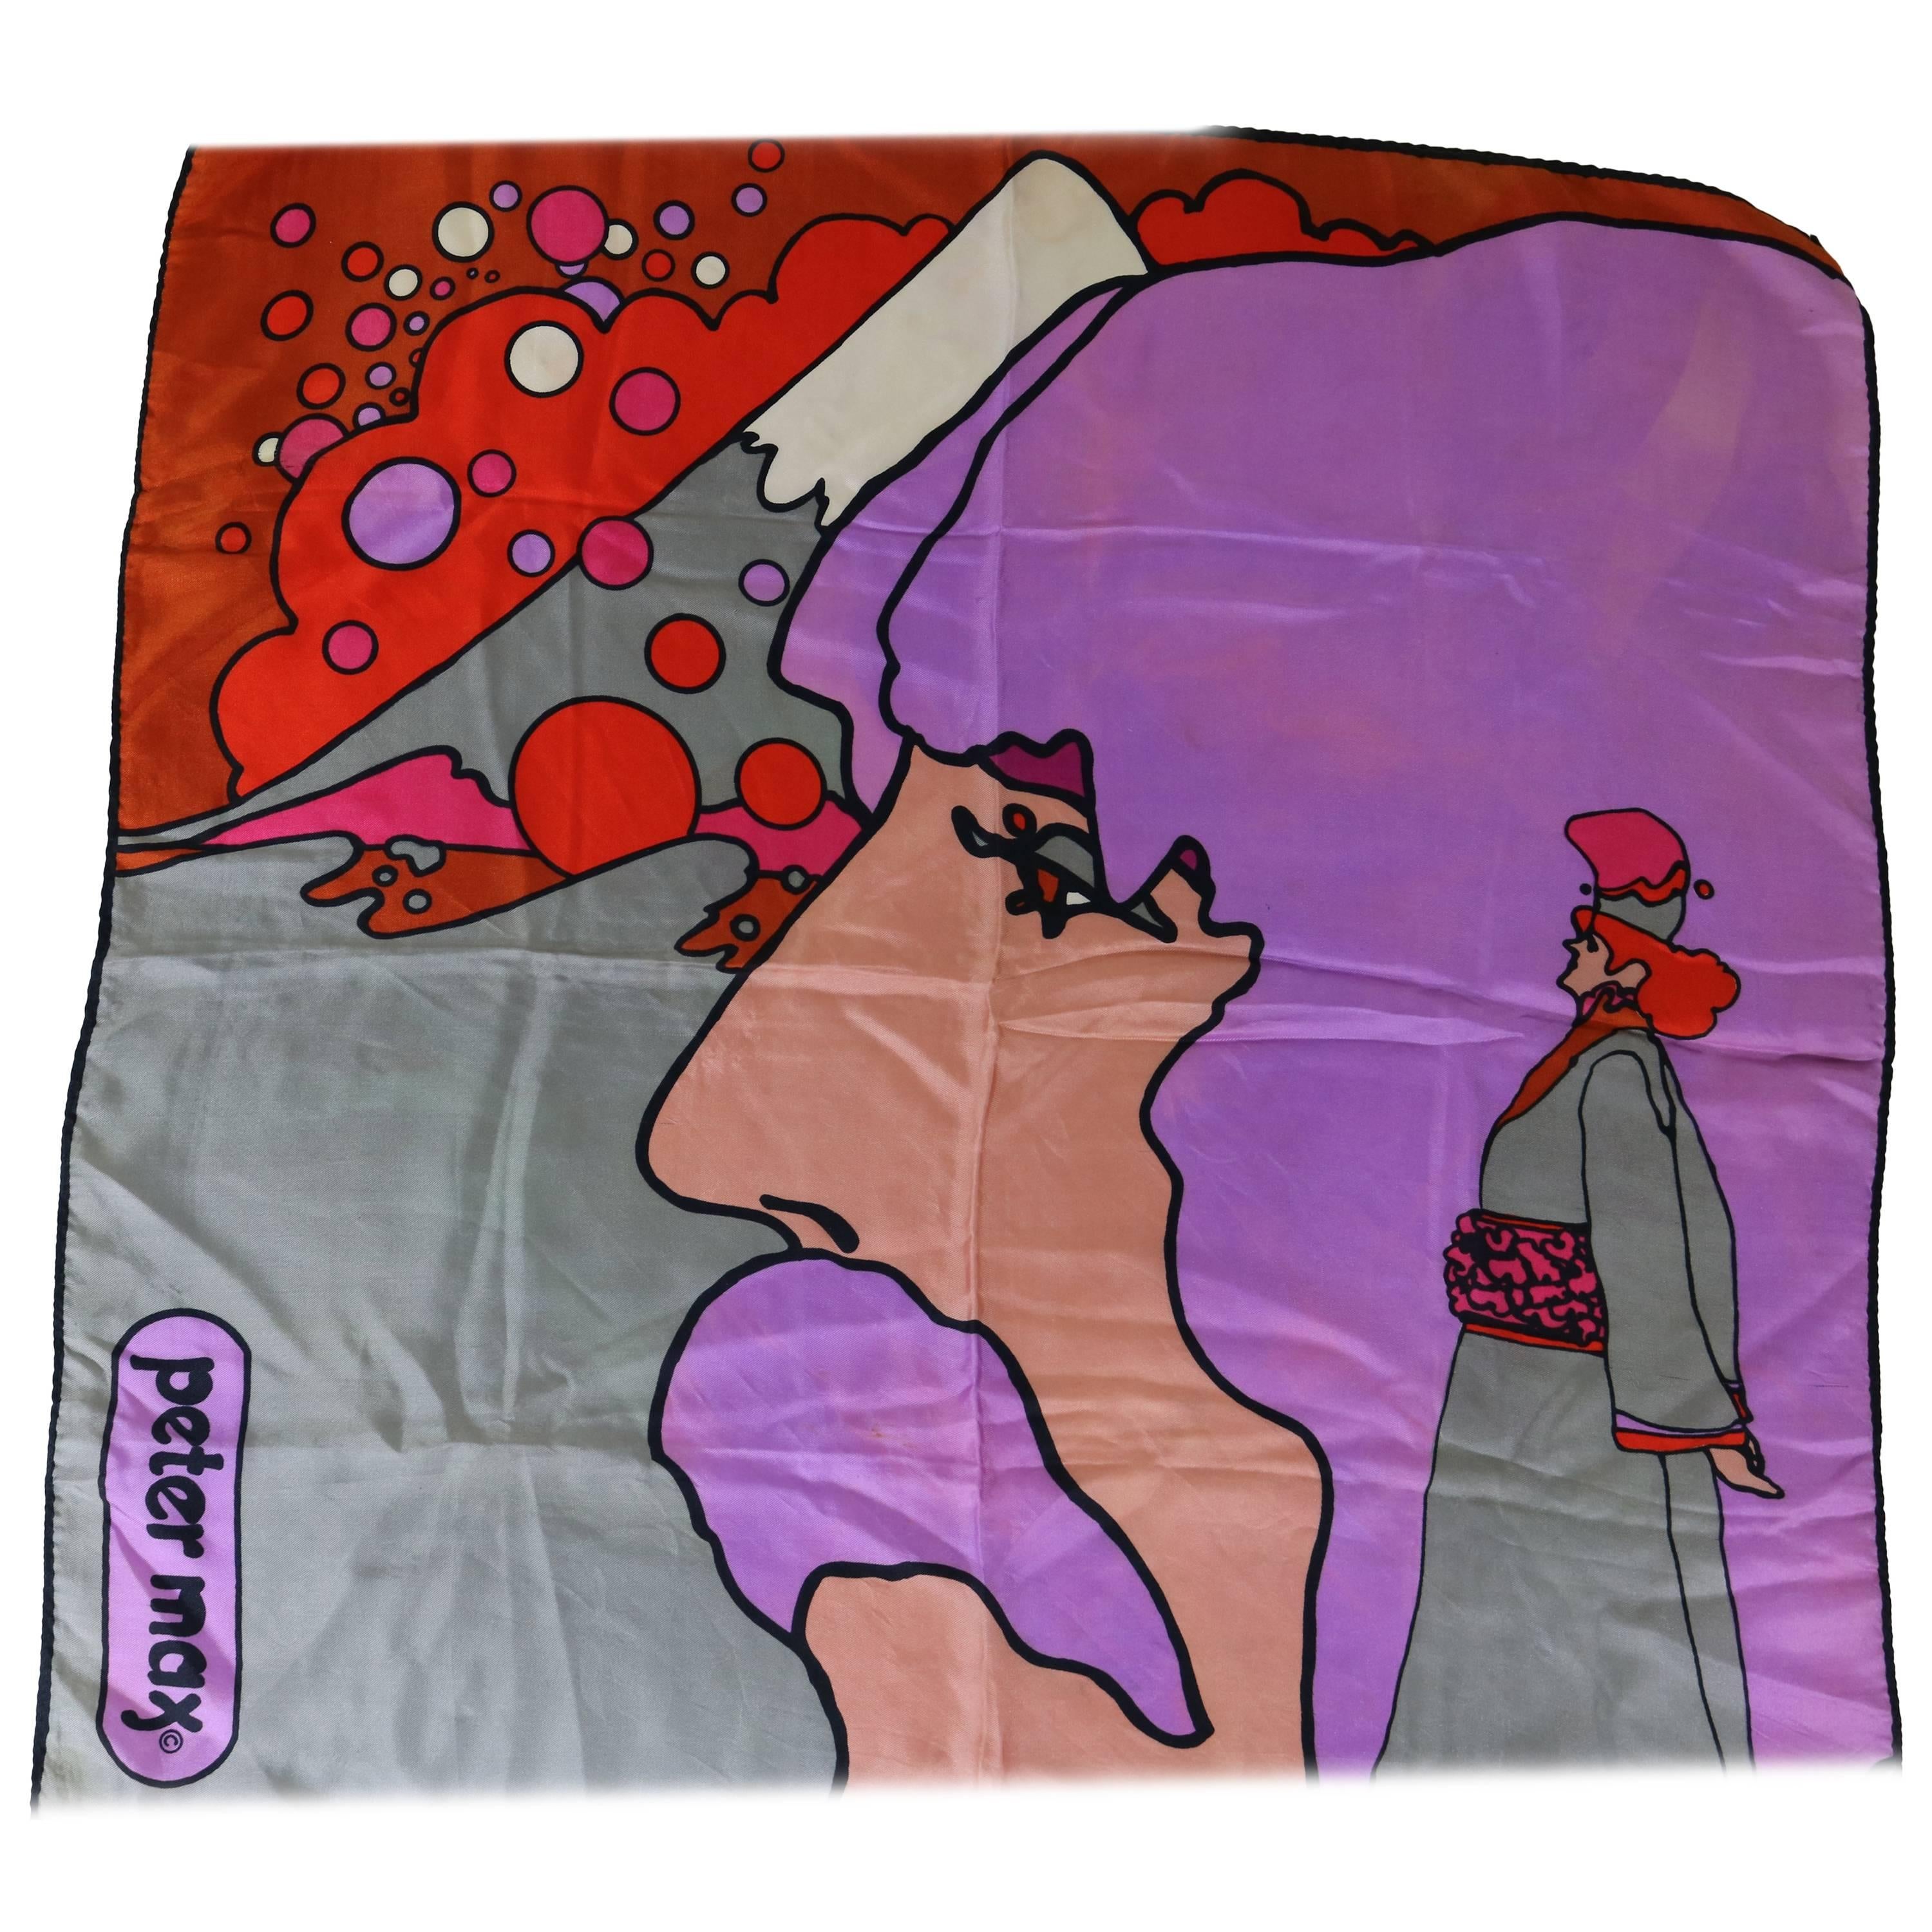 1970 Peter Max "Beatles" Psychedelic Silk Scarf- A Work of Art-Wear or Display For Sale